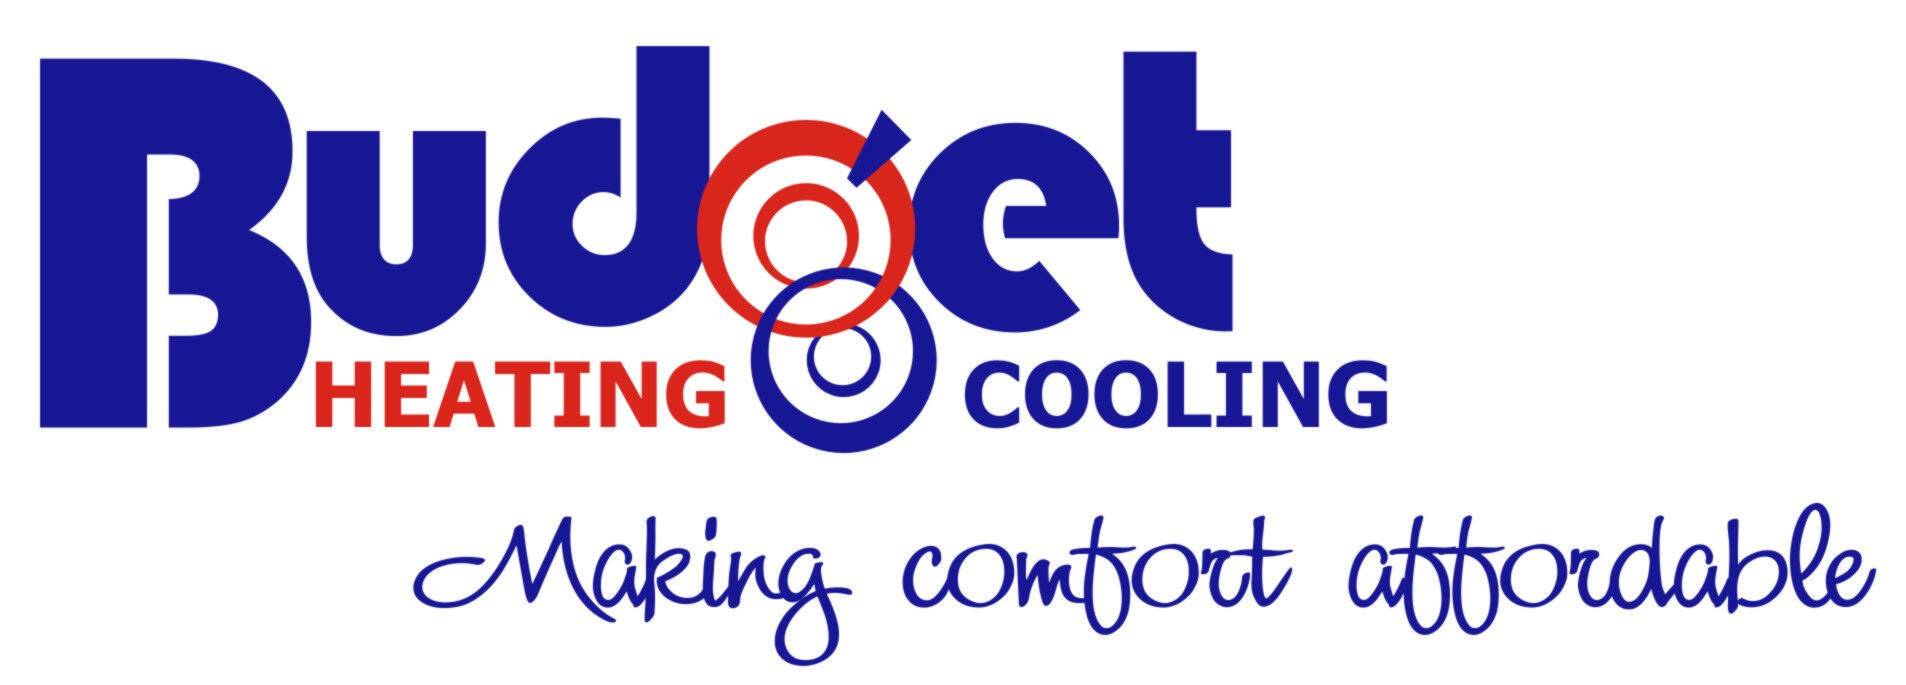 Budget Heating and Cooling